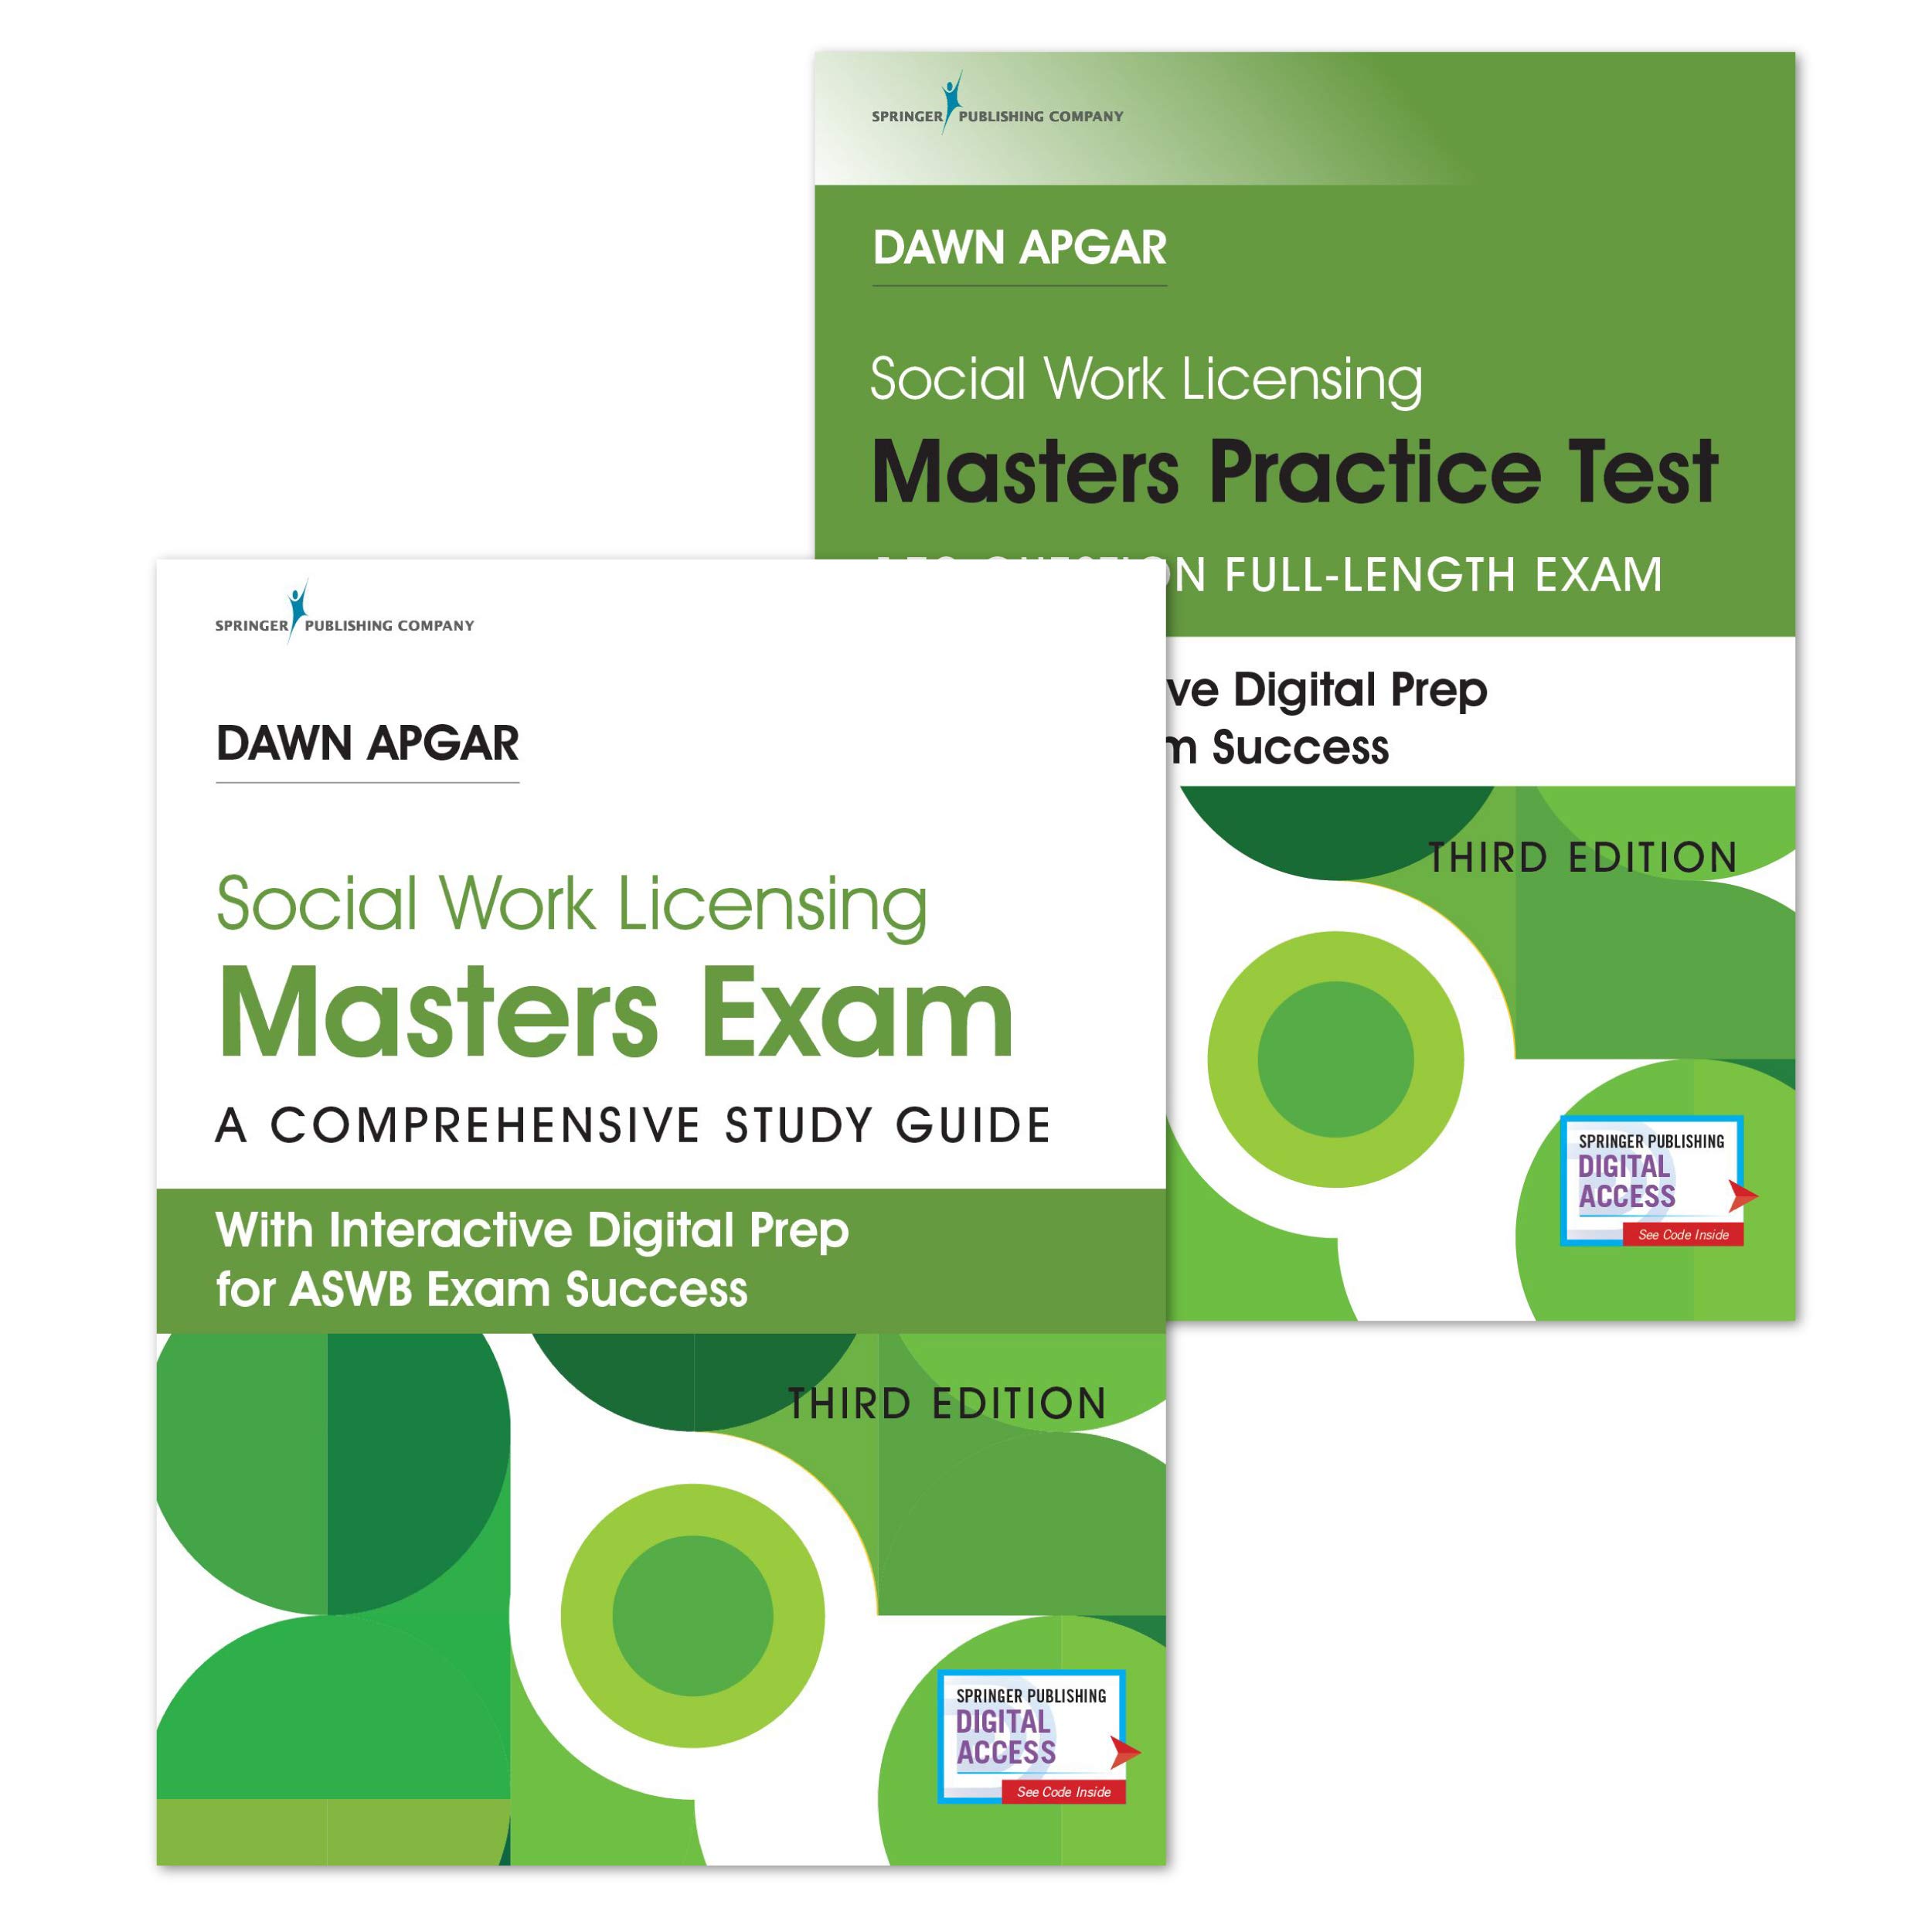 Social Work Licensing Masters Exam Guide and Practice Test Set: A Comprehensive Study Guide for Success (3rd Edition) – Includes a Total of 340 Que...